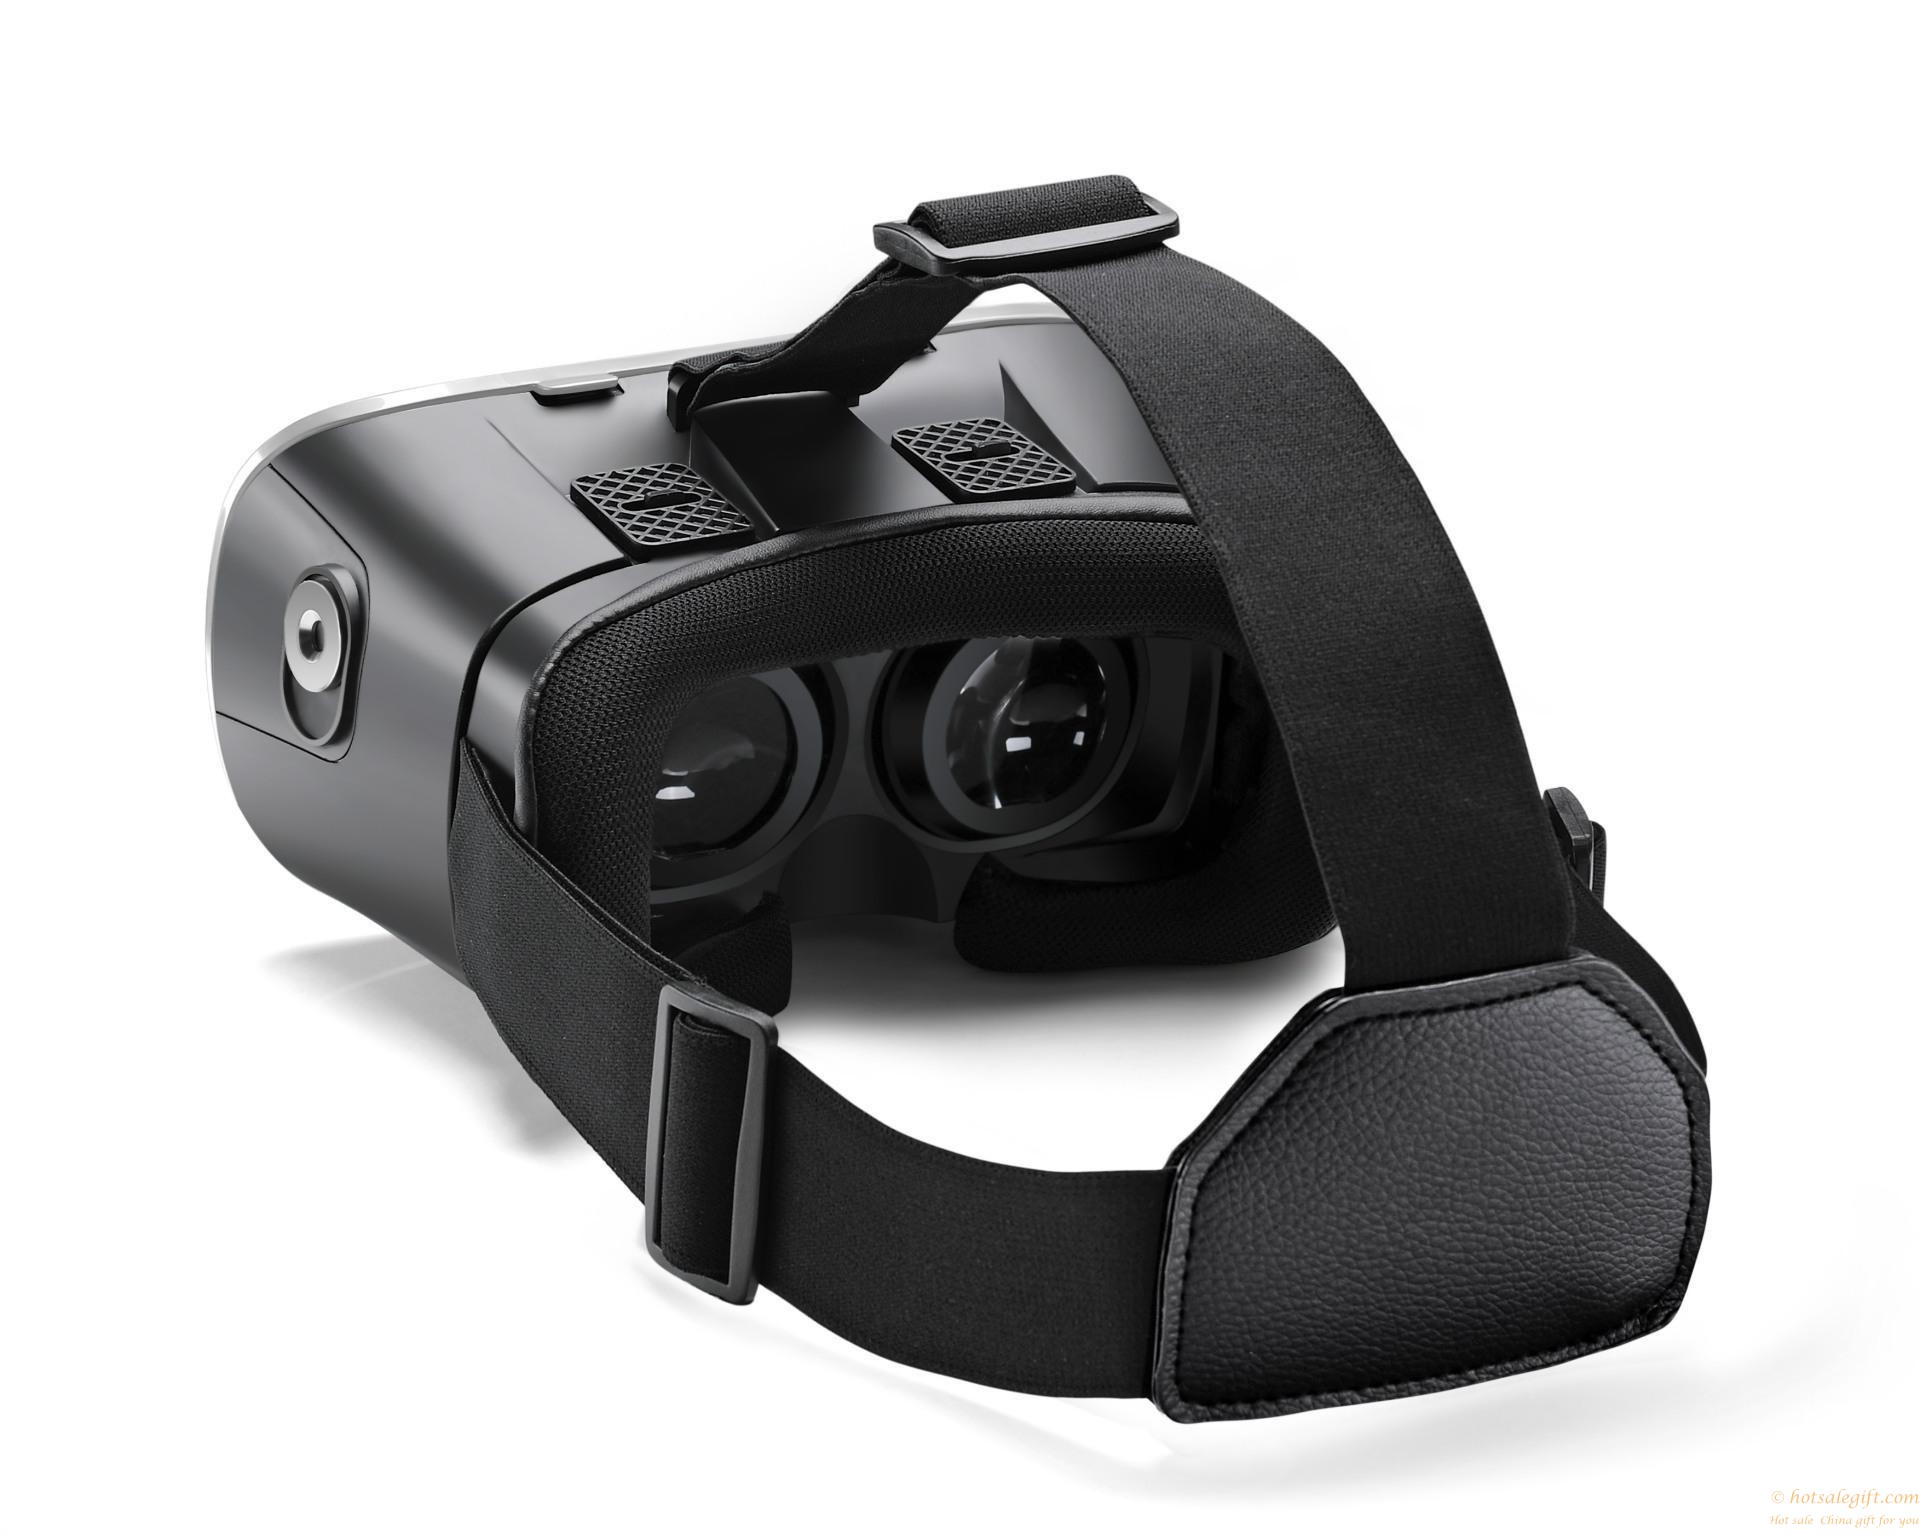 hotsalegift 3d vr headmounted virtual reality movie games glasses iphone android phones 2